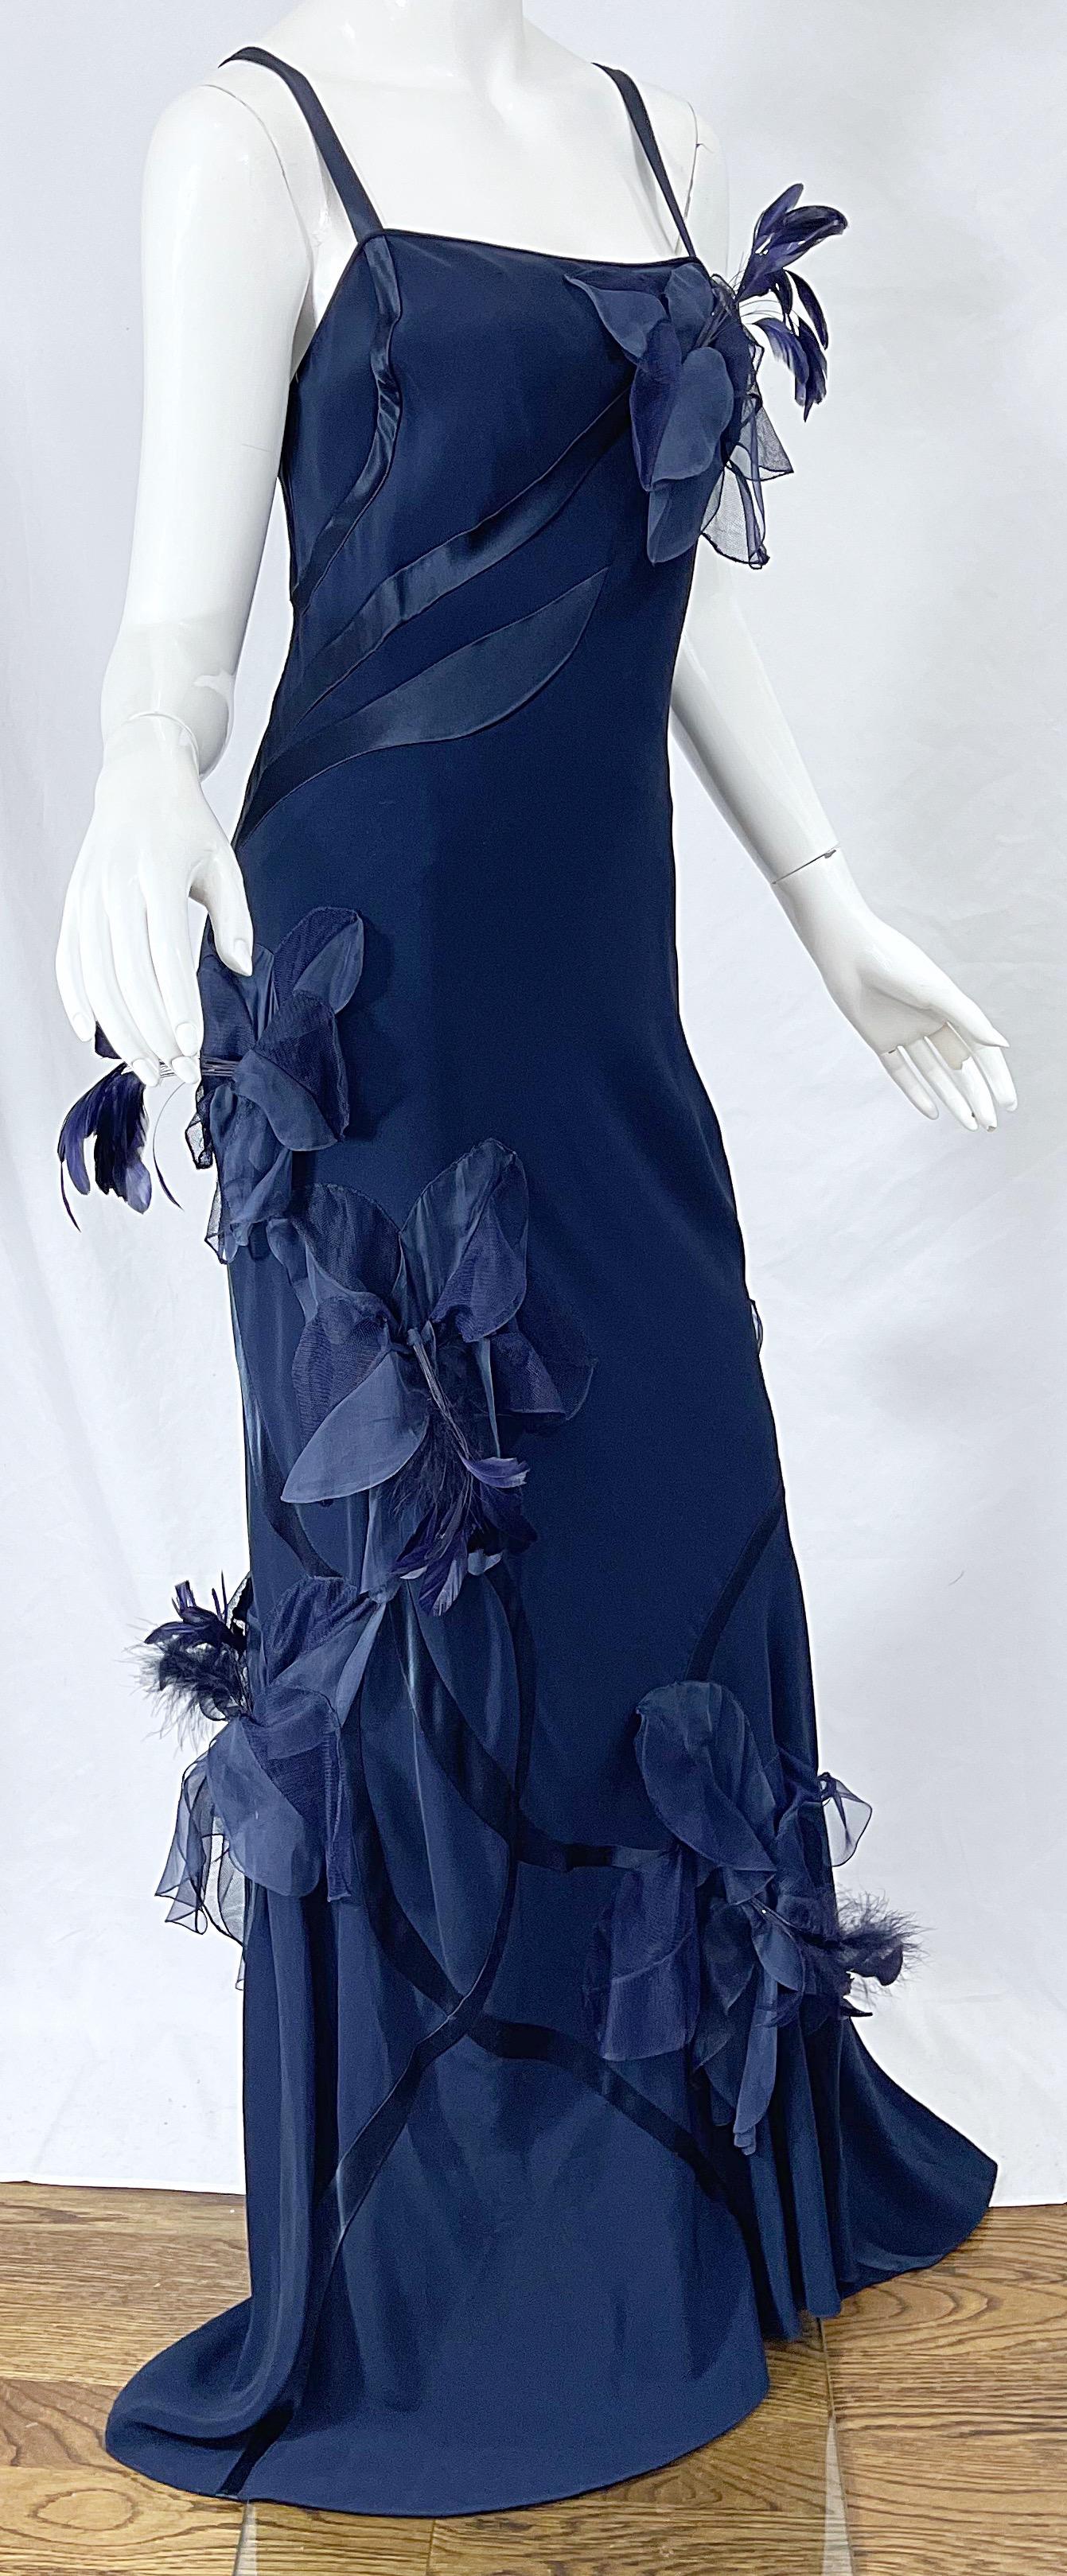 NWT John Galliano Size 10 Early 2000s Navy Blue Feather Silk / Satin Gown Dress 1